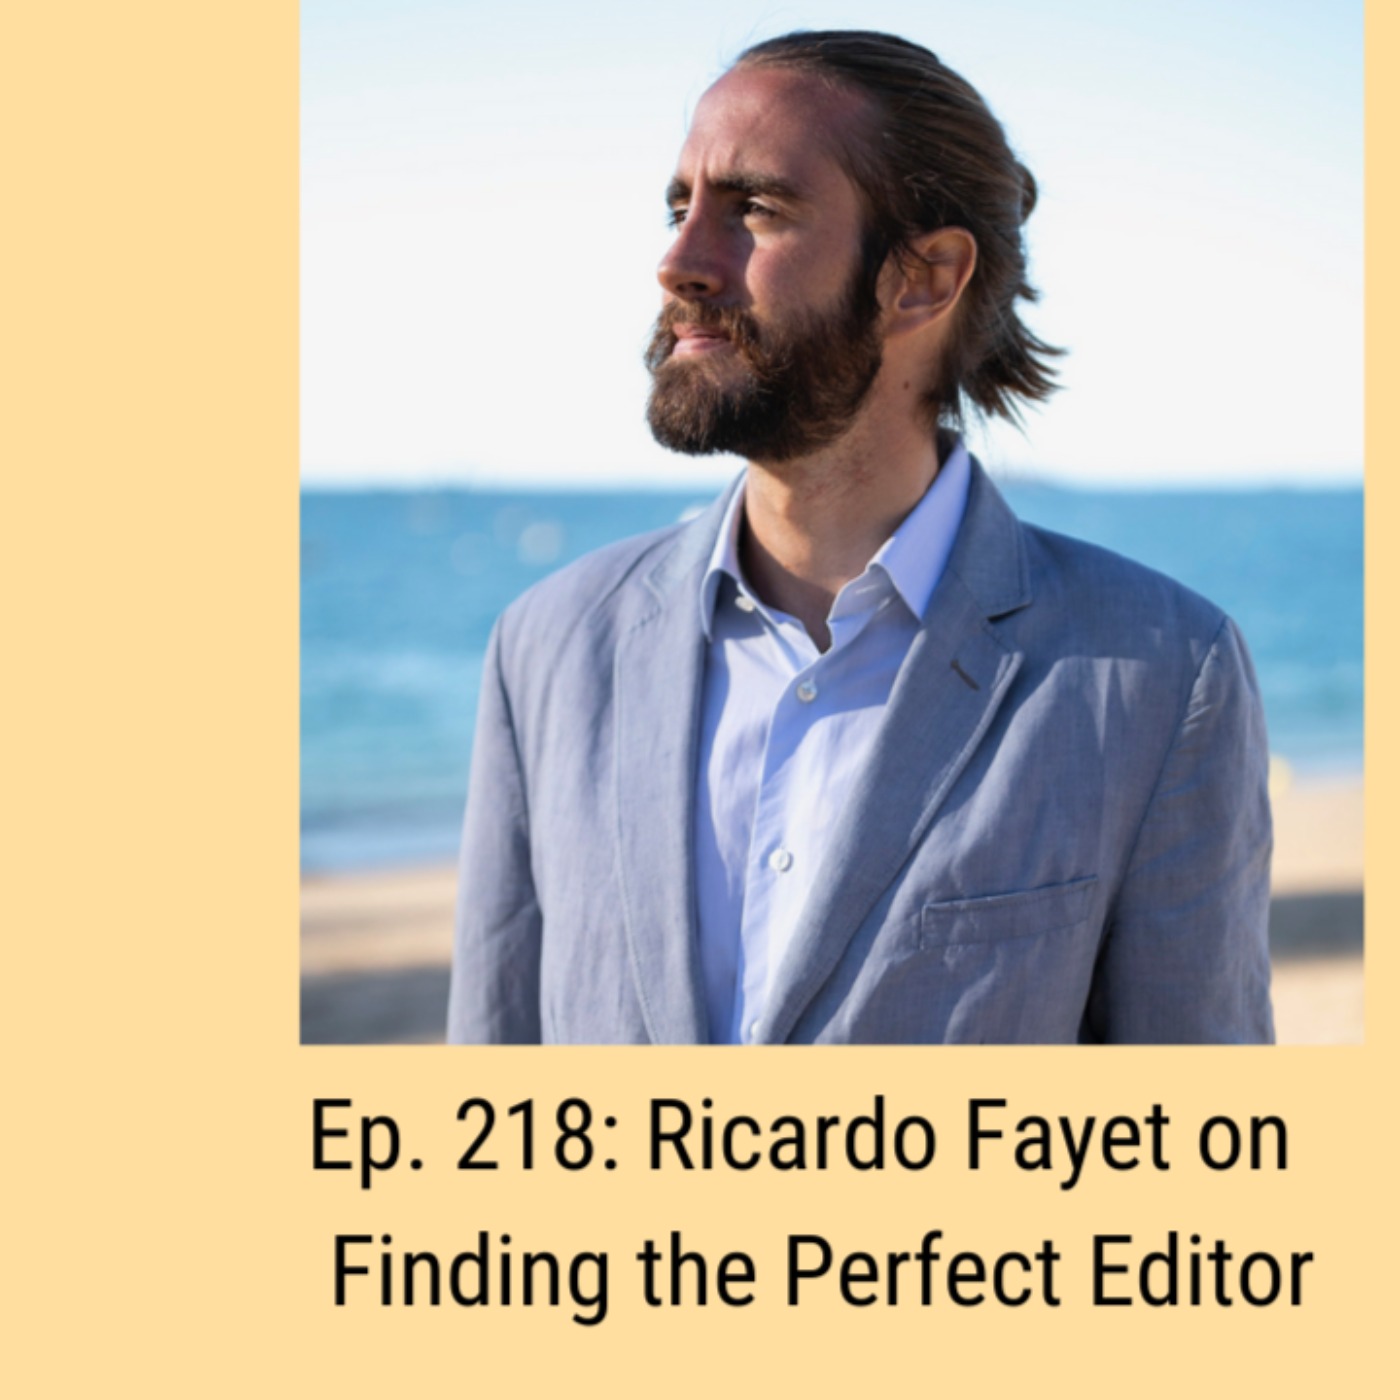 Ep. 218: Ricardo Fayet on Finding the Perfect Editor